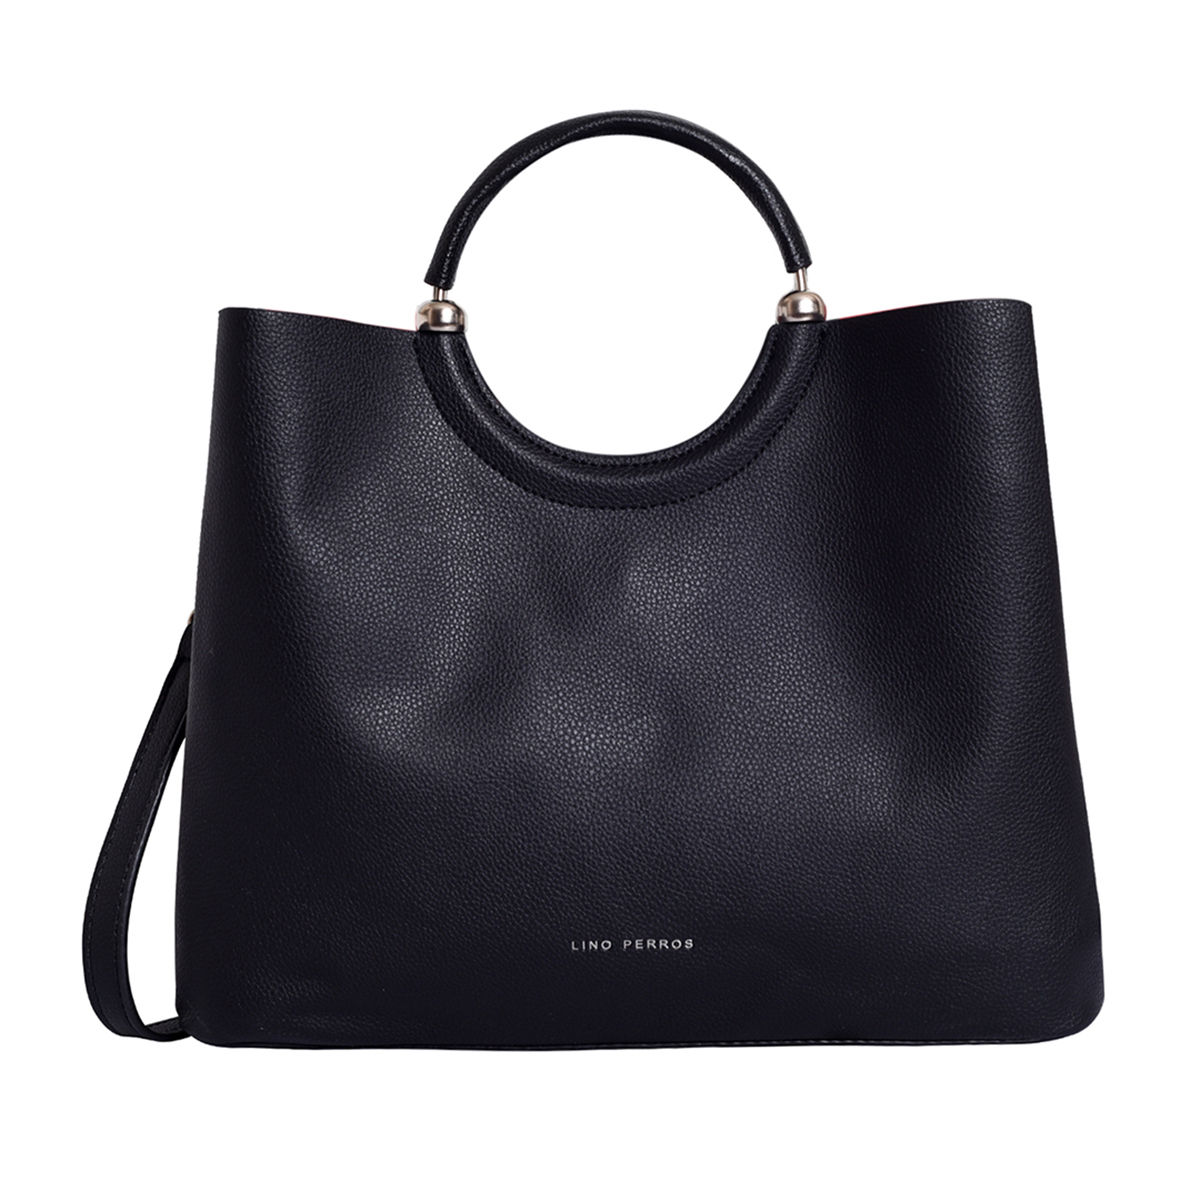 Women Black Handbags  Buy Women Black Handbags Online Starting at Just  177  Meesho